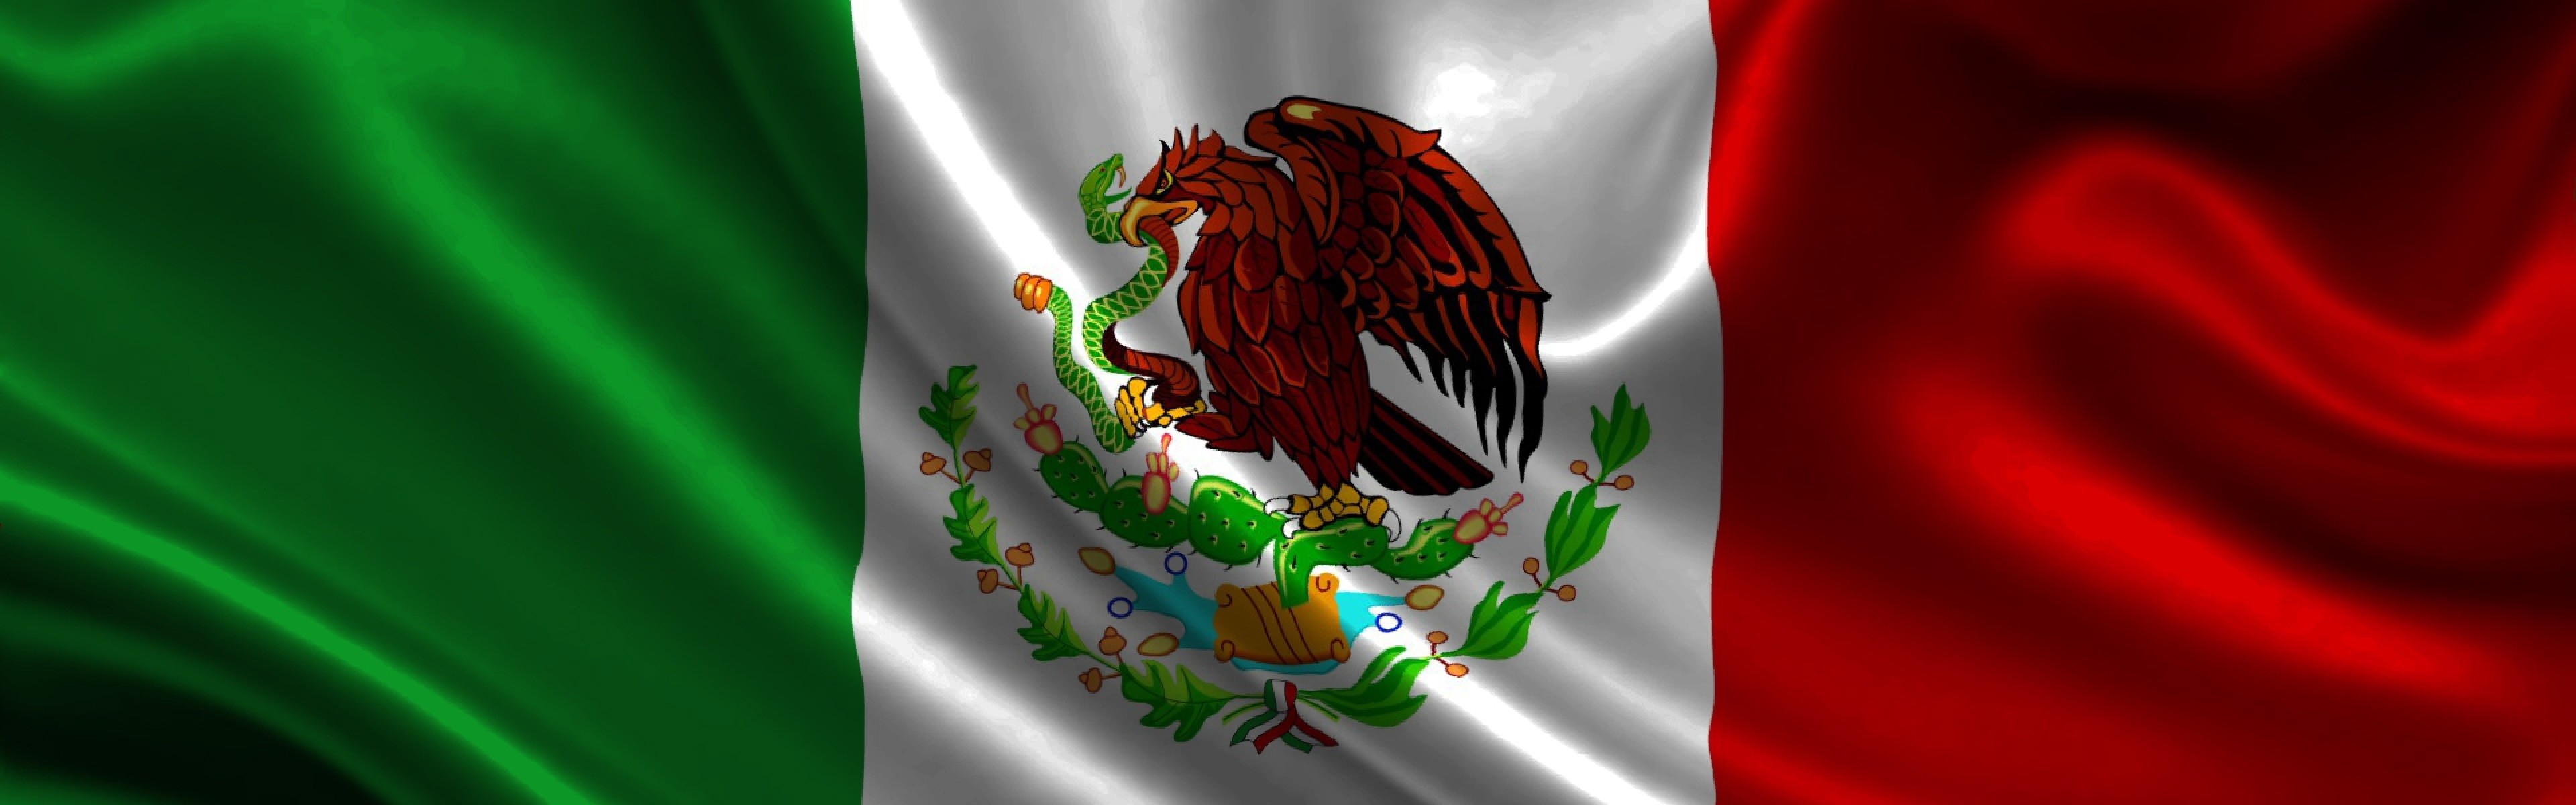 3840x1200 New Mexican Flag Backgrounds, View #721250939 Mexican Flag Wallpapers